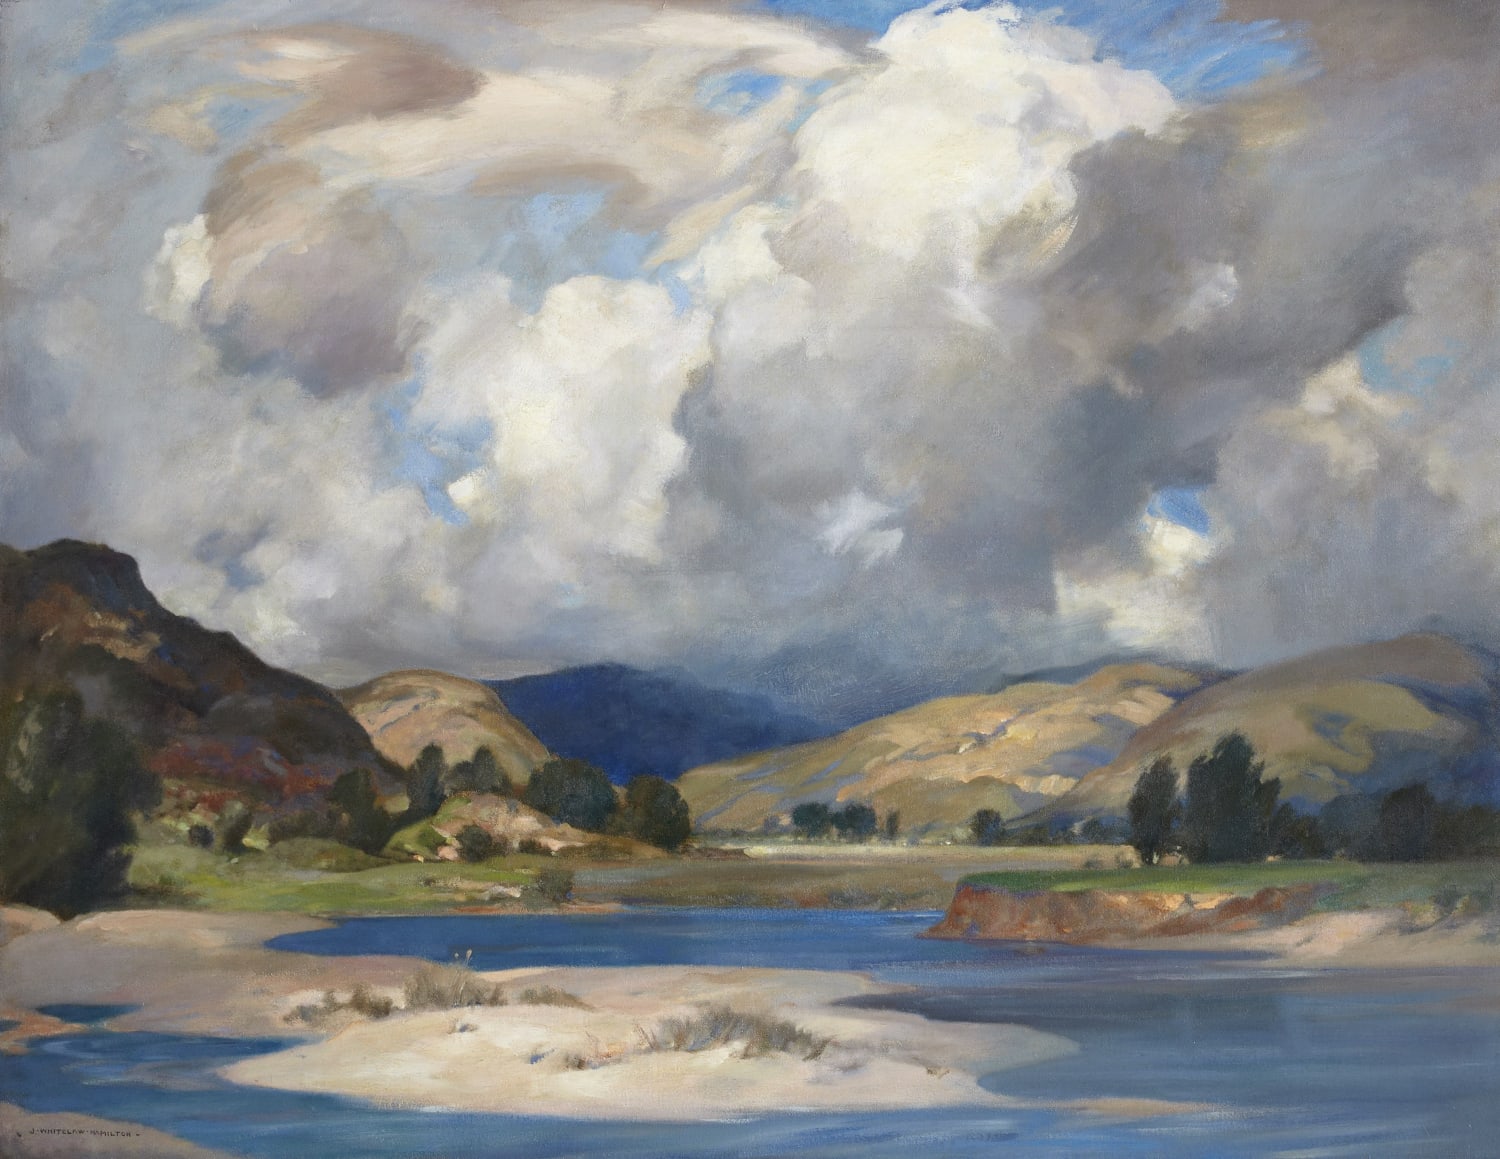 James Whitelaw Hamilton RSA (1860-1932), Stormclouds, Strathfillan  Oil on canvas, around 1919-20, 86.7 x 112.9cm (support)  RSA Diploma Collection (Deposited, 1922) 2000.085